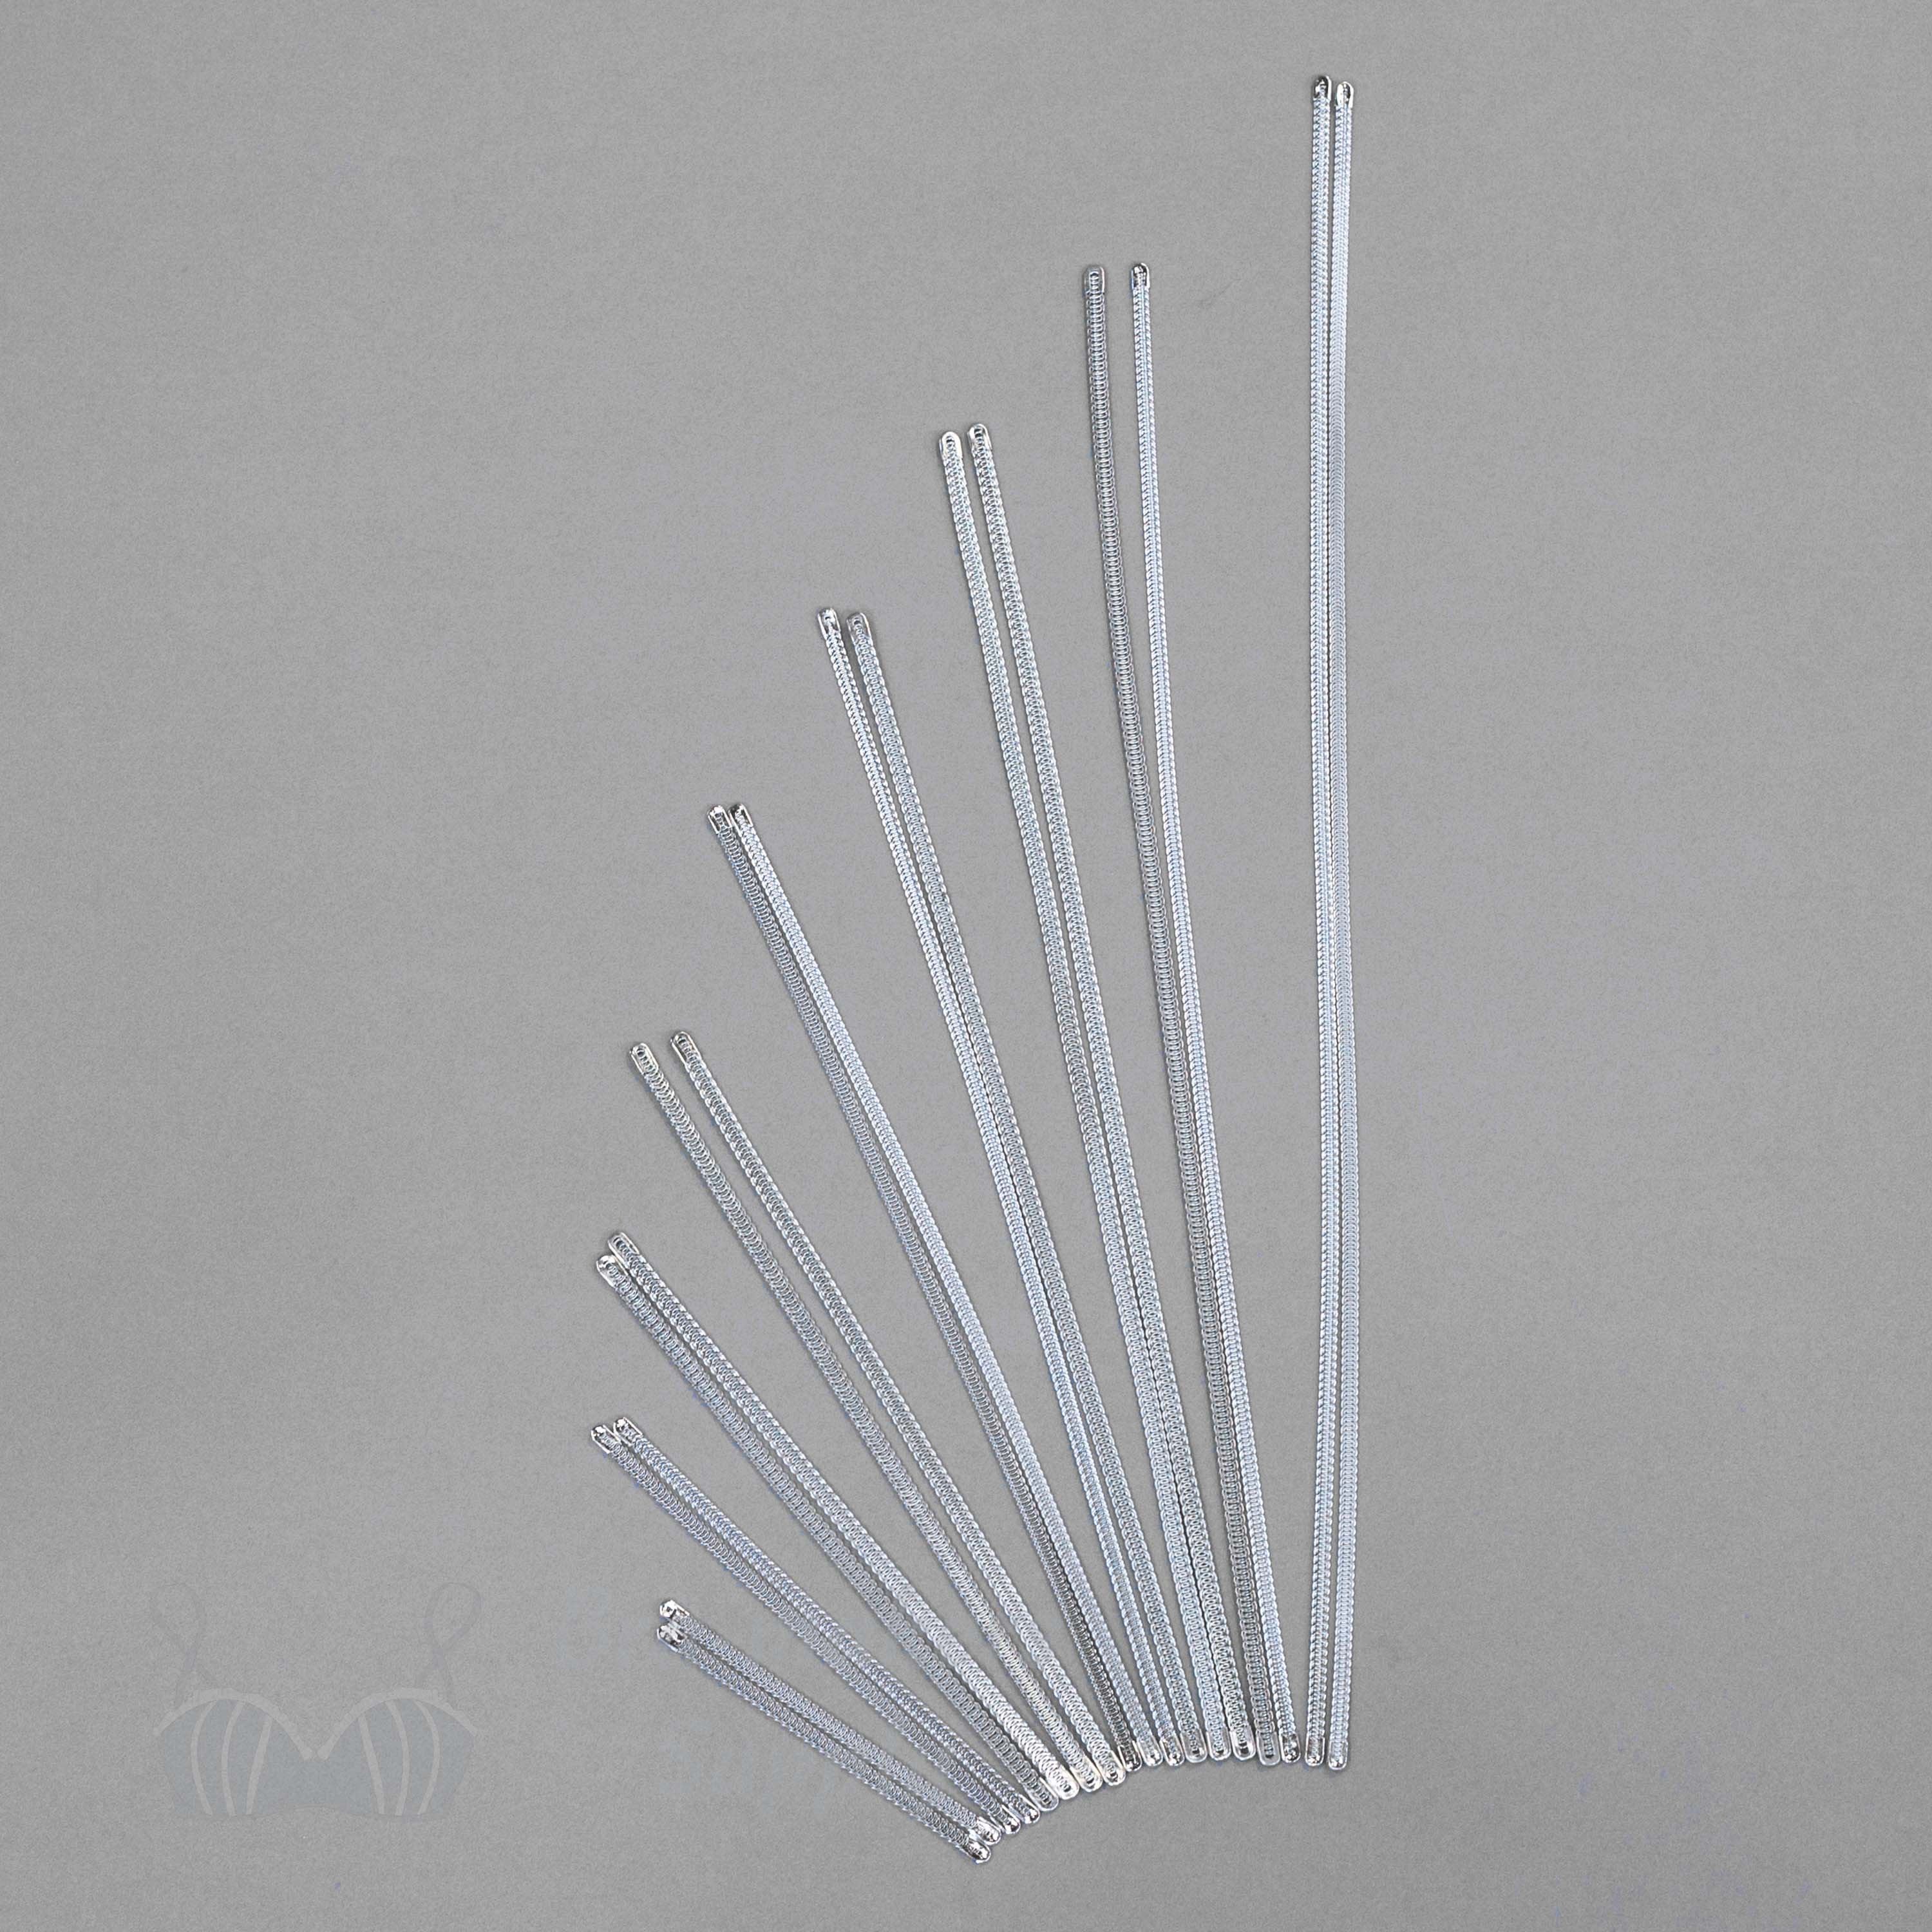 Unlorspy 25Pcs 0.2 x 13.77 Inch Metal Steel Spiral Corset Boning, Spiral  Steel Metal Boning with 50Pcs Steel Boning Tips for Sewing Costumes Making